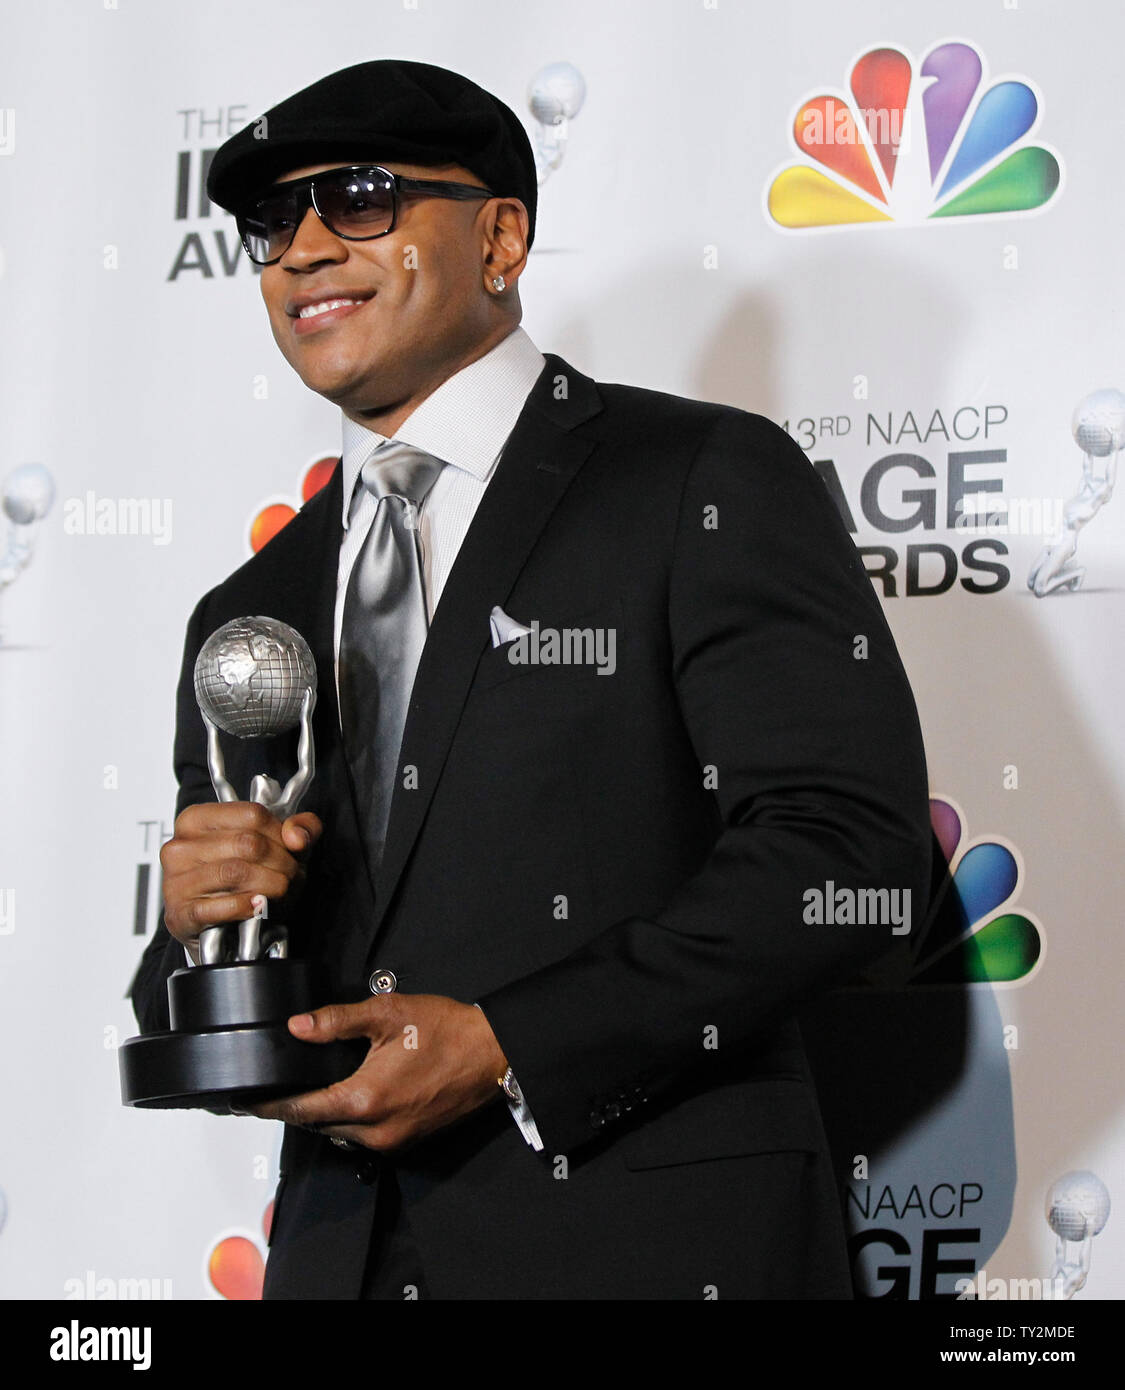 Actor LL Cool J holds his award for Outstanding Actor in a Drama Series for 'NCIS: Los Angeles' in the press room at the 43rd NAACP Image Awards at the Shrine Auditorium in Los Angeles on February 17, 2012.  UPI/Danny Moloshok Stock Photo